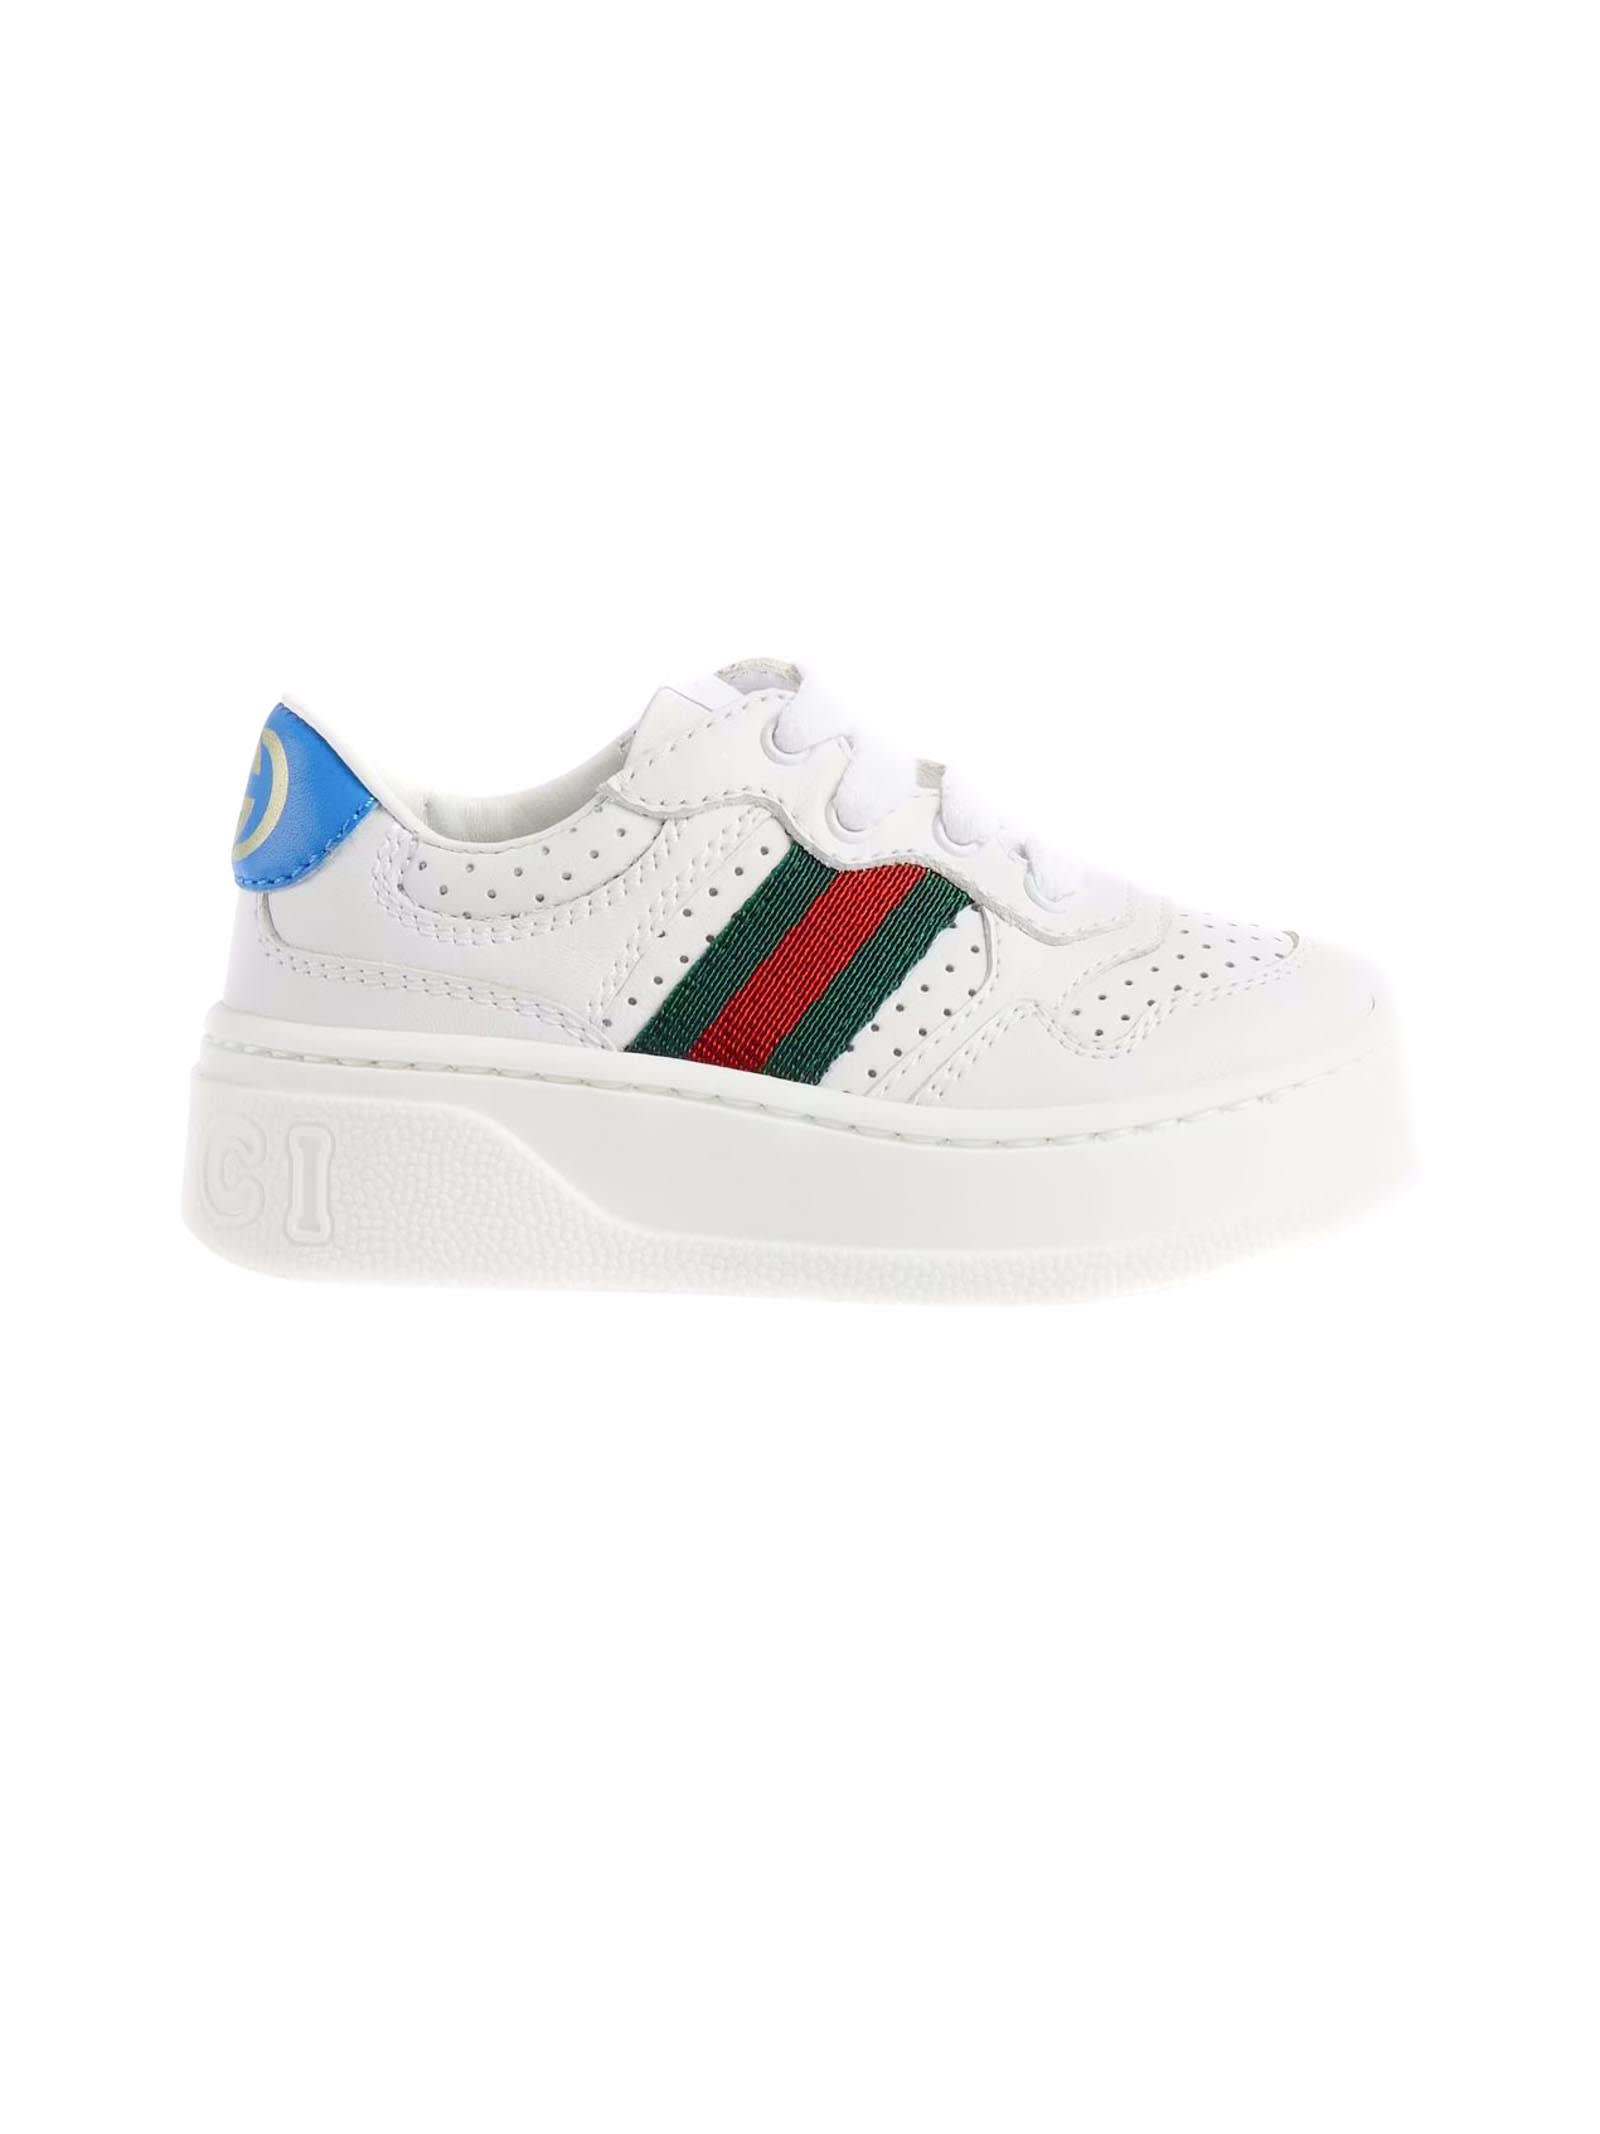 Gucci White Leather Toddler Sneaker